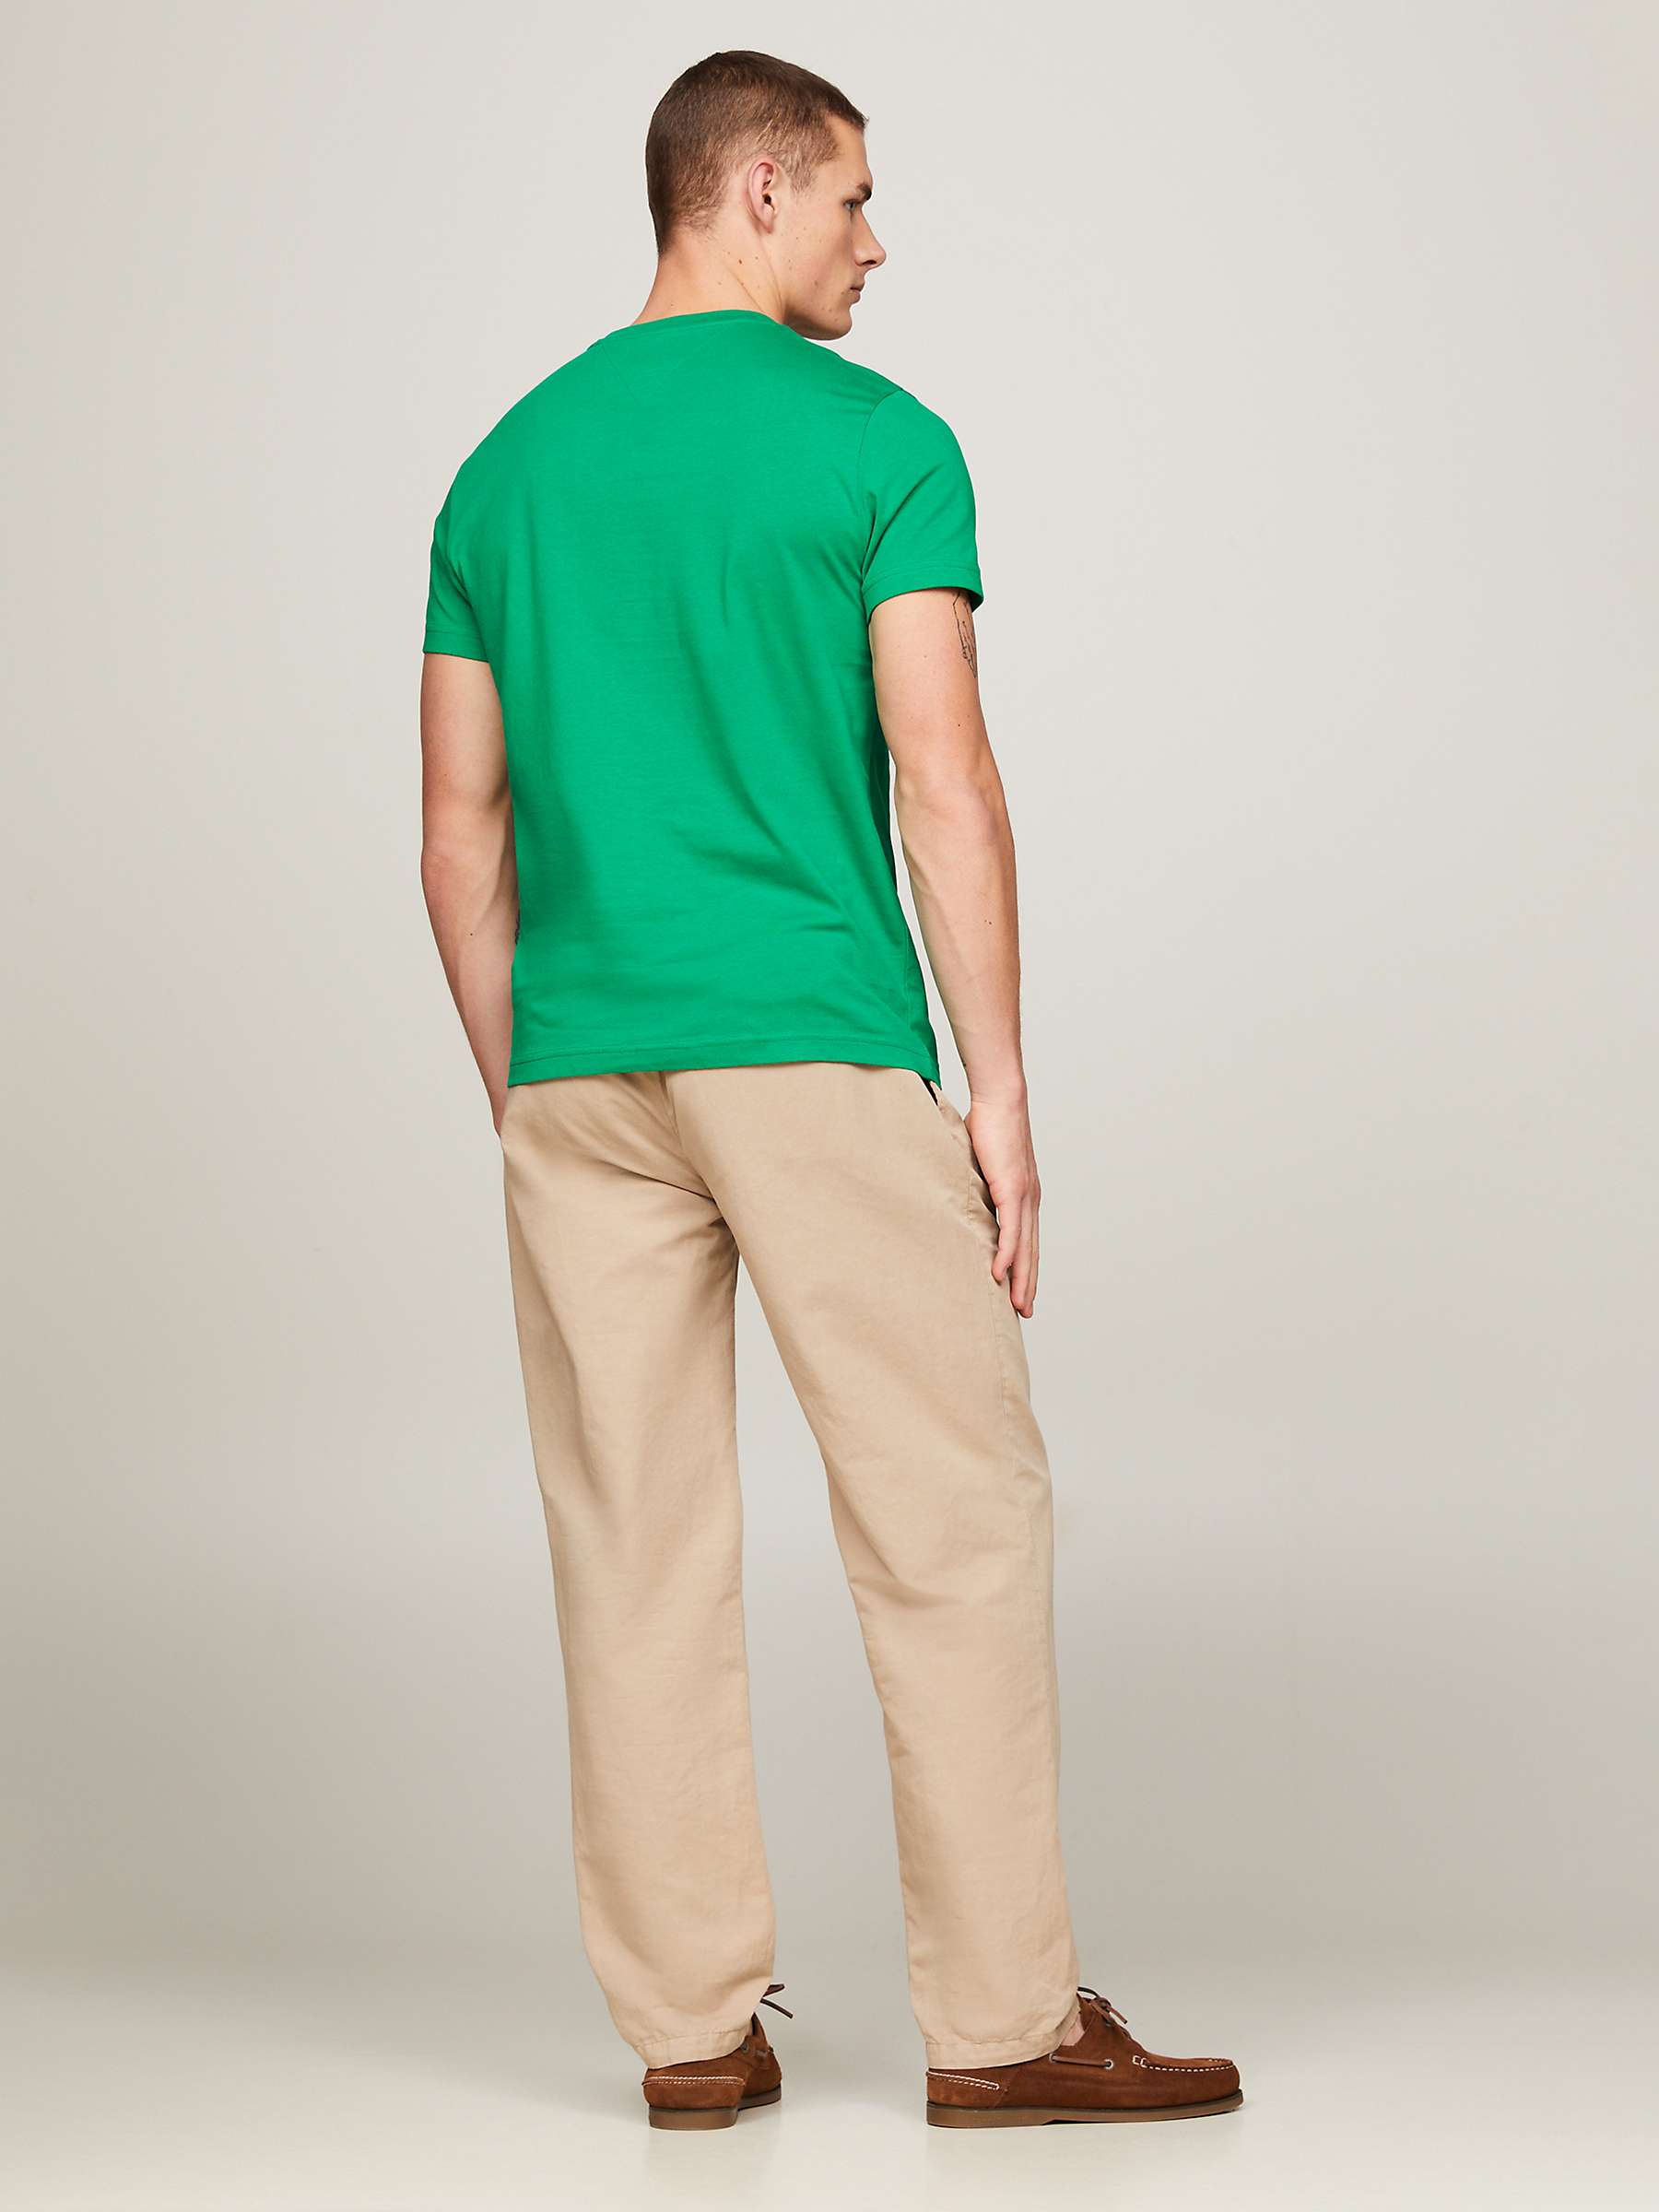 Buy Tommy Hilfiger Cotton Logo Top,  Olympic Green Online at johnlewis.com